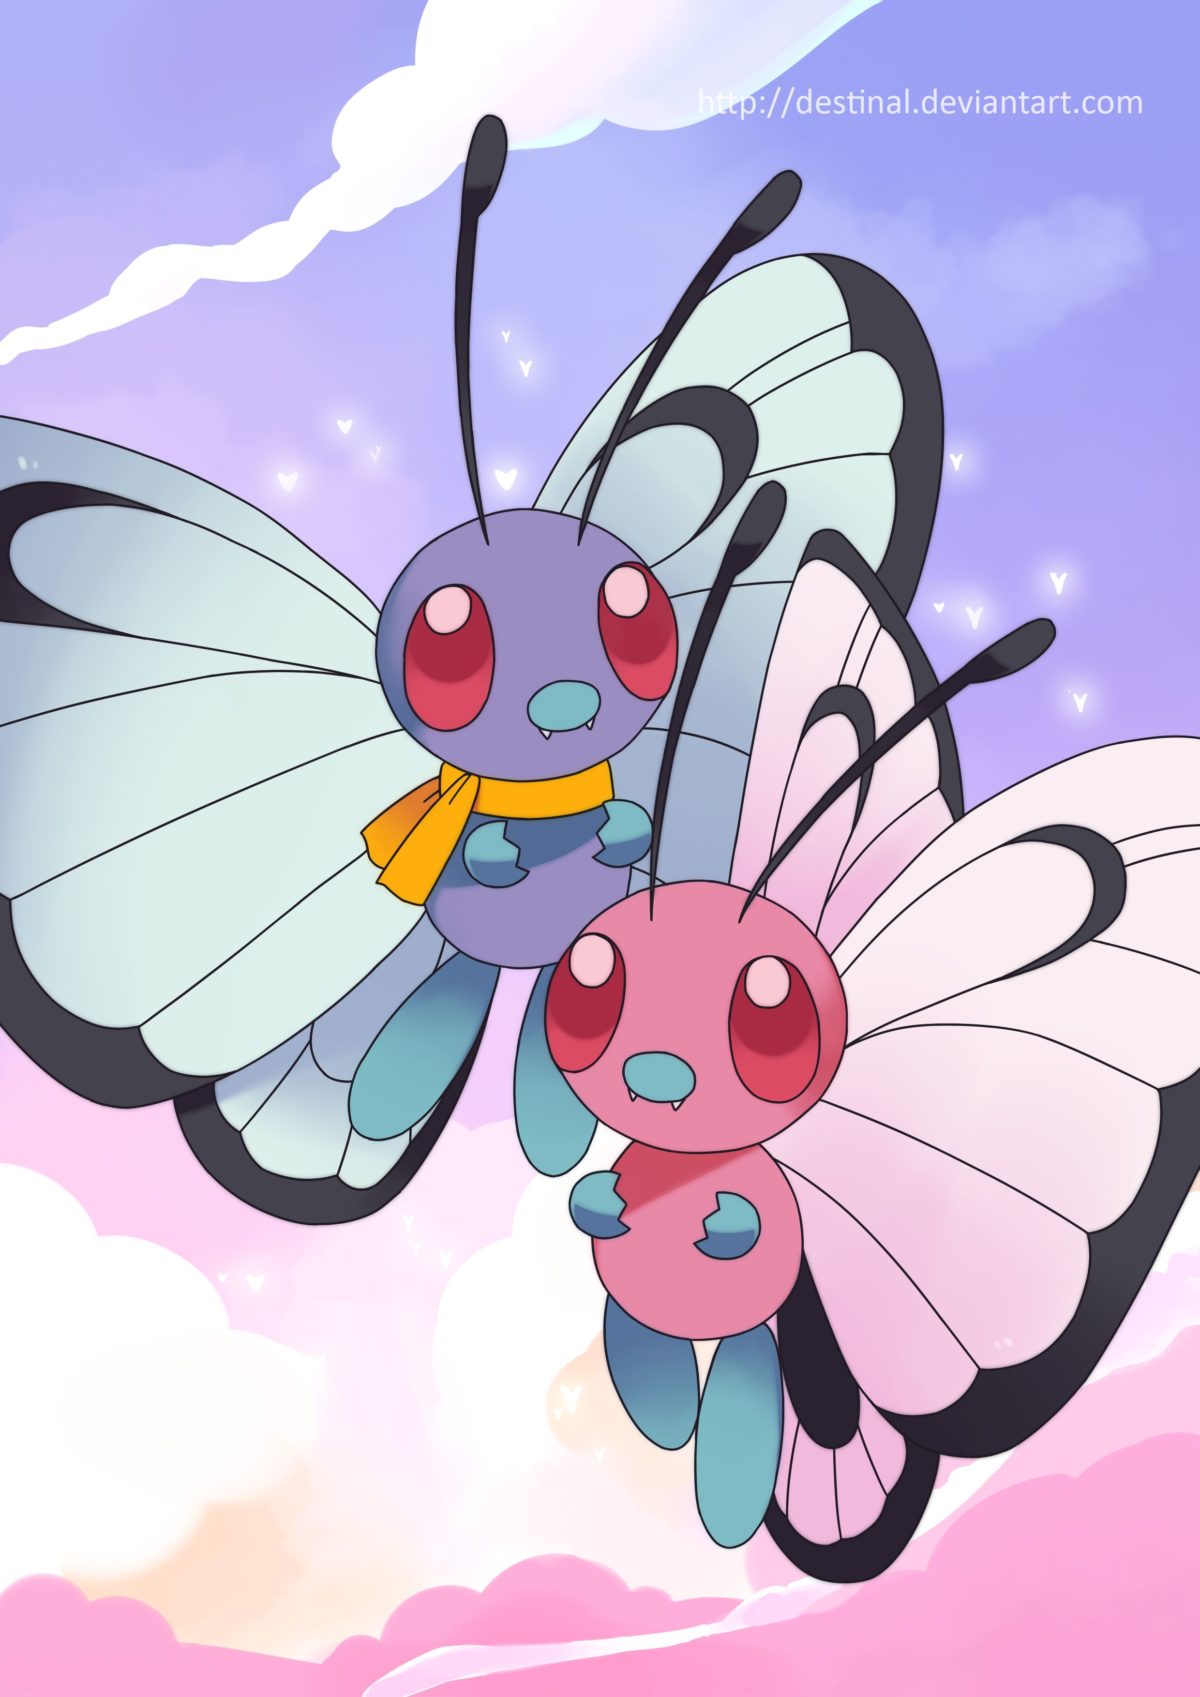 Butterfree duo Poster by Crystal-Ribbon on DeviantArt